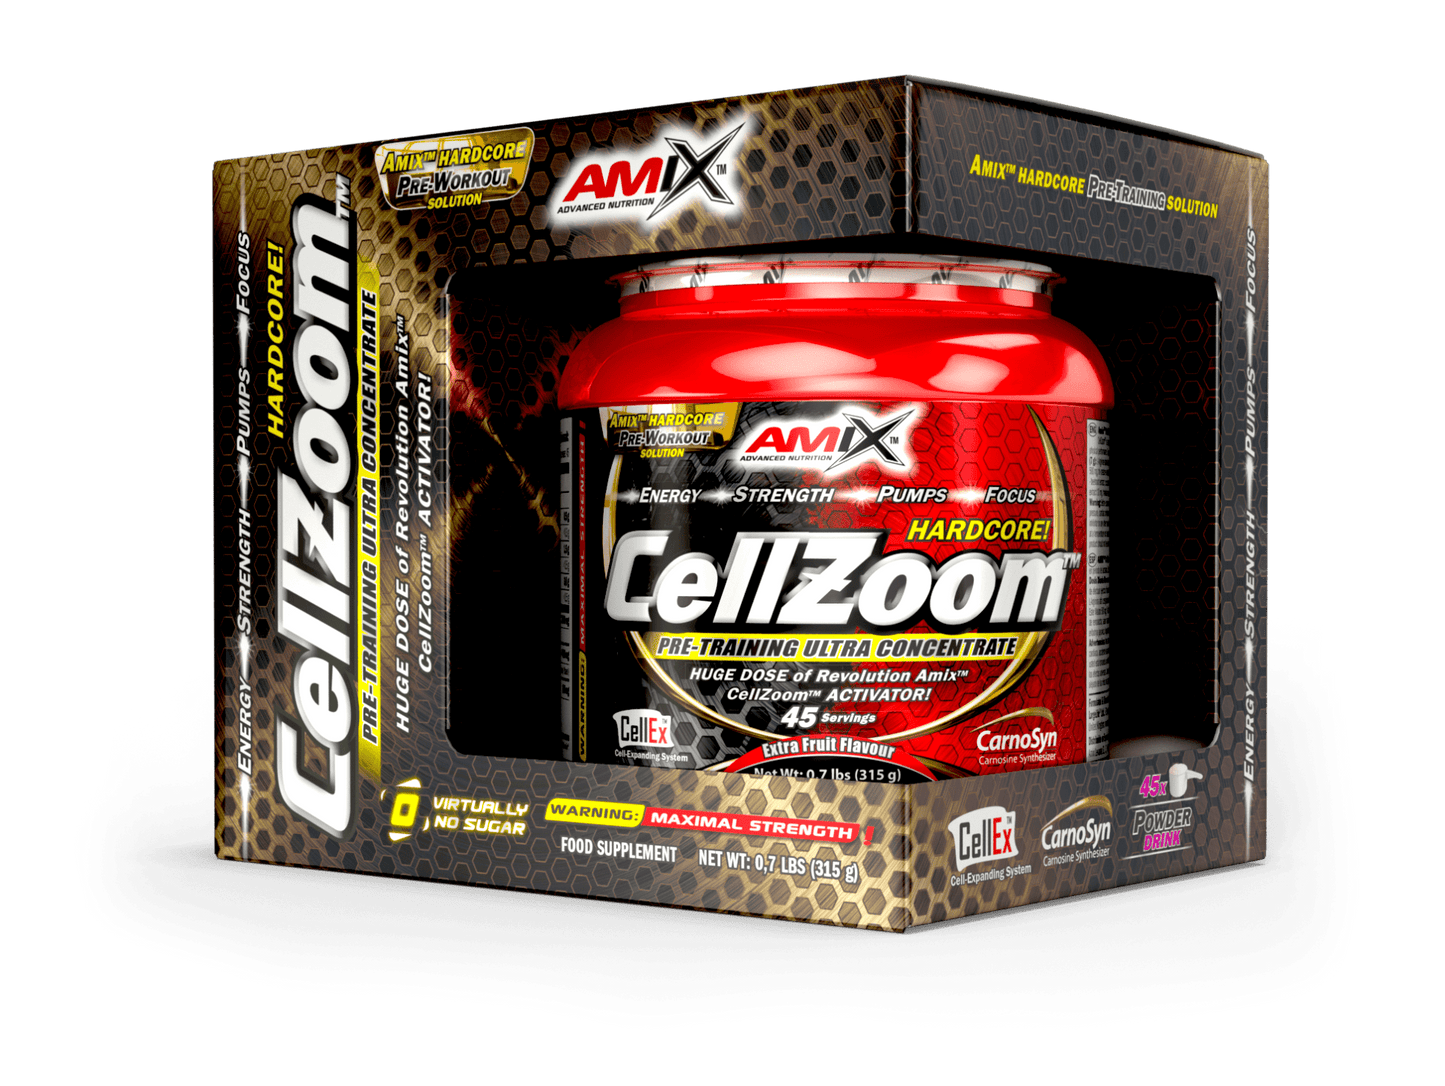 Cellzoom 315g